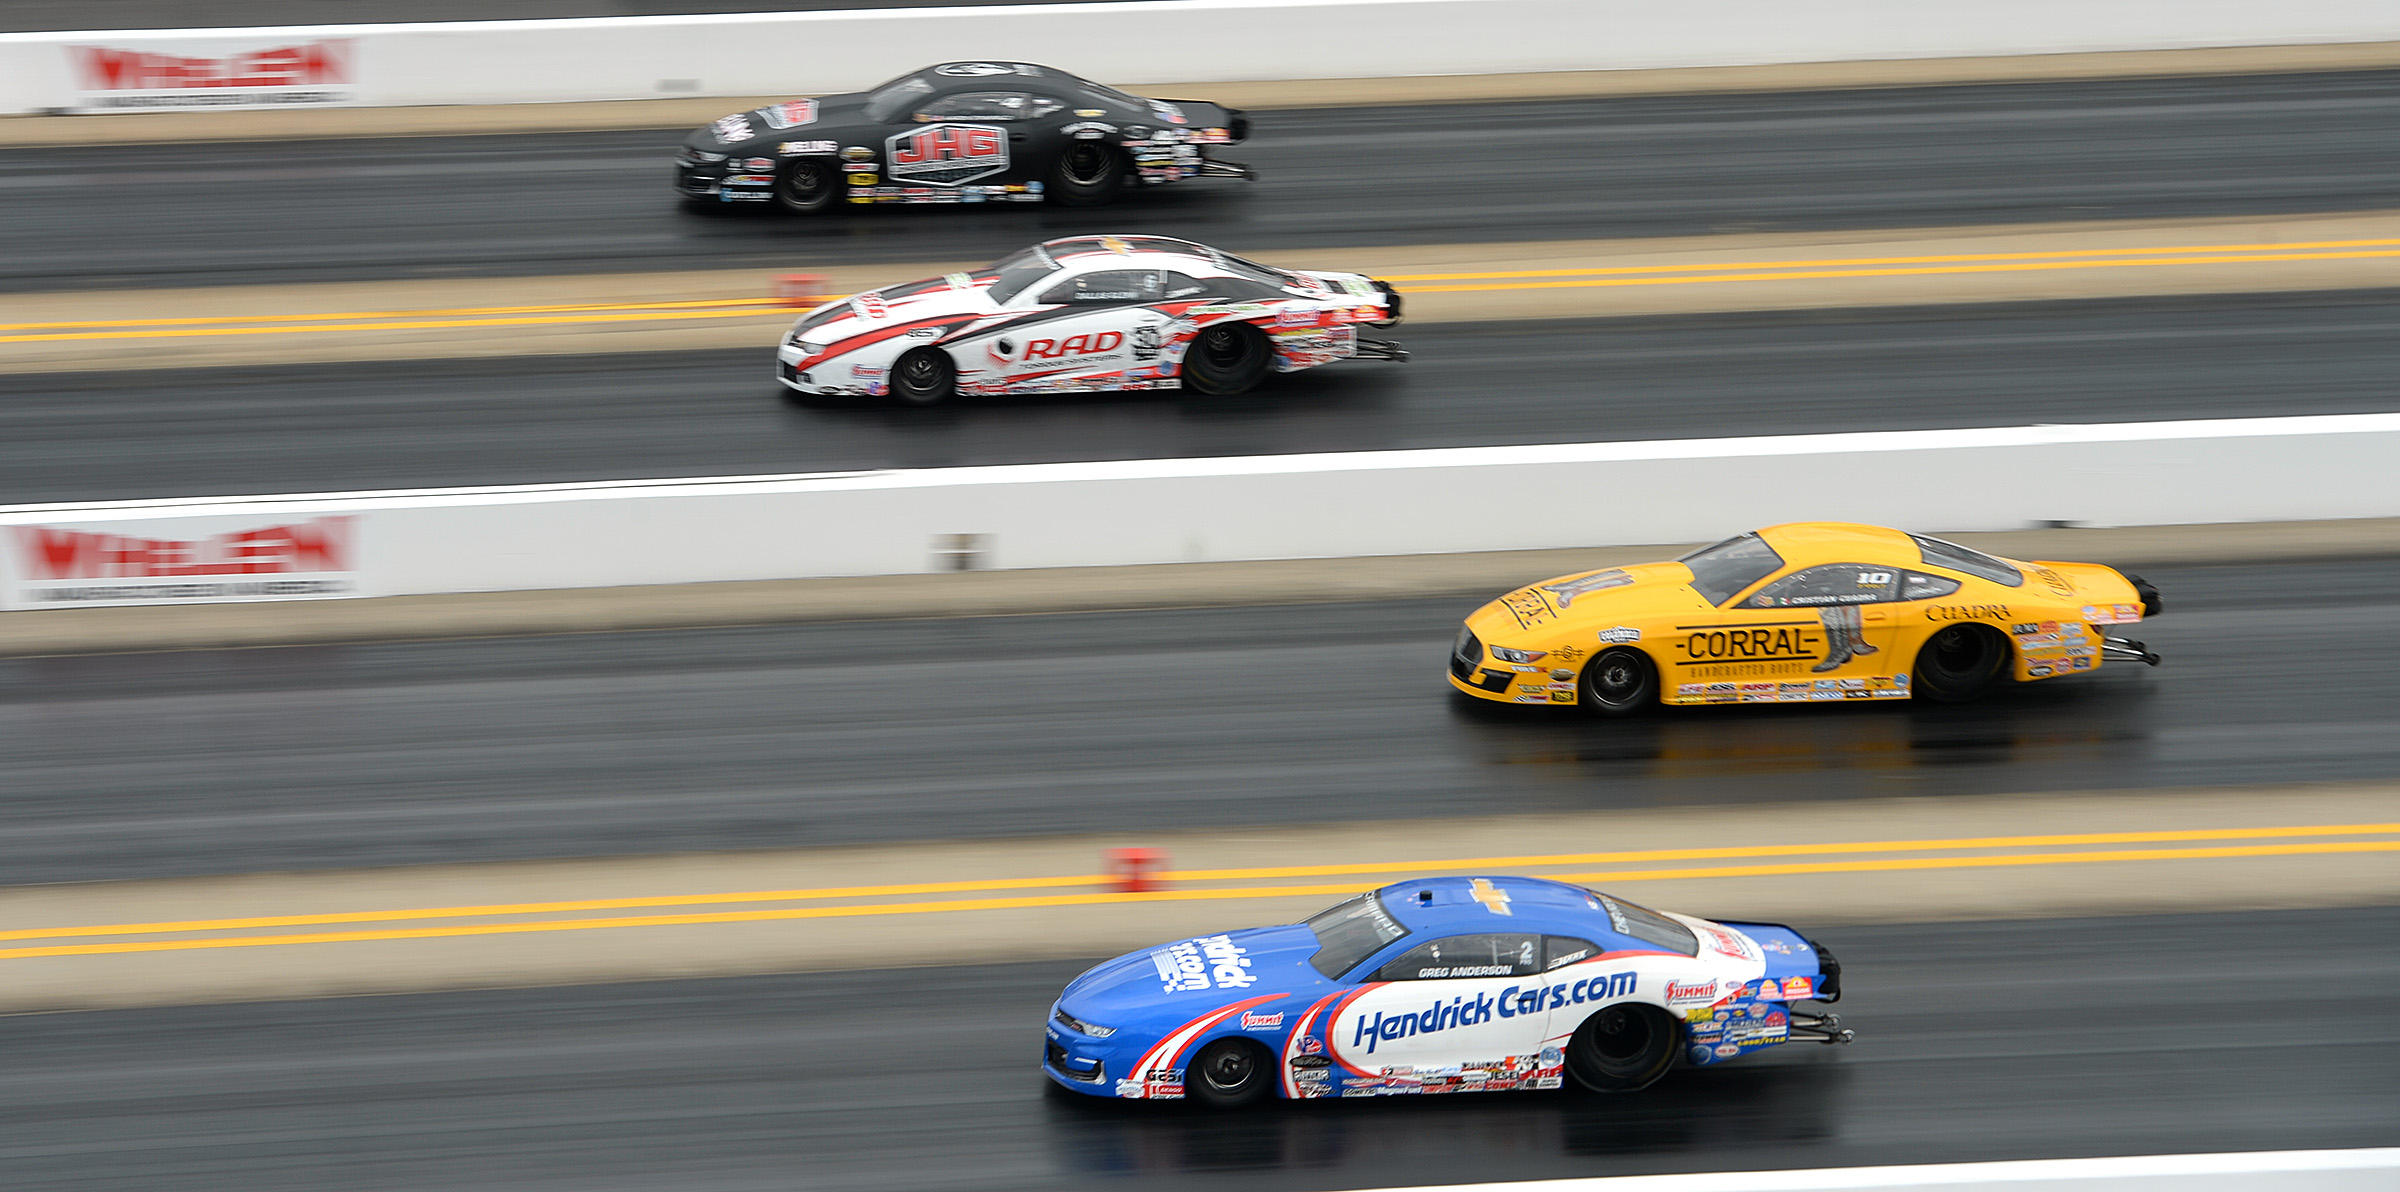 Greg Anderson (near lane) picked up the win in the Pro Stock class at the NHRA 4-wide Nationals at zMax Dragway on Sunday.